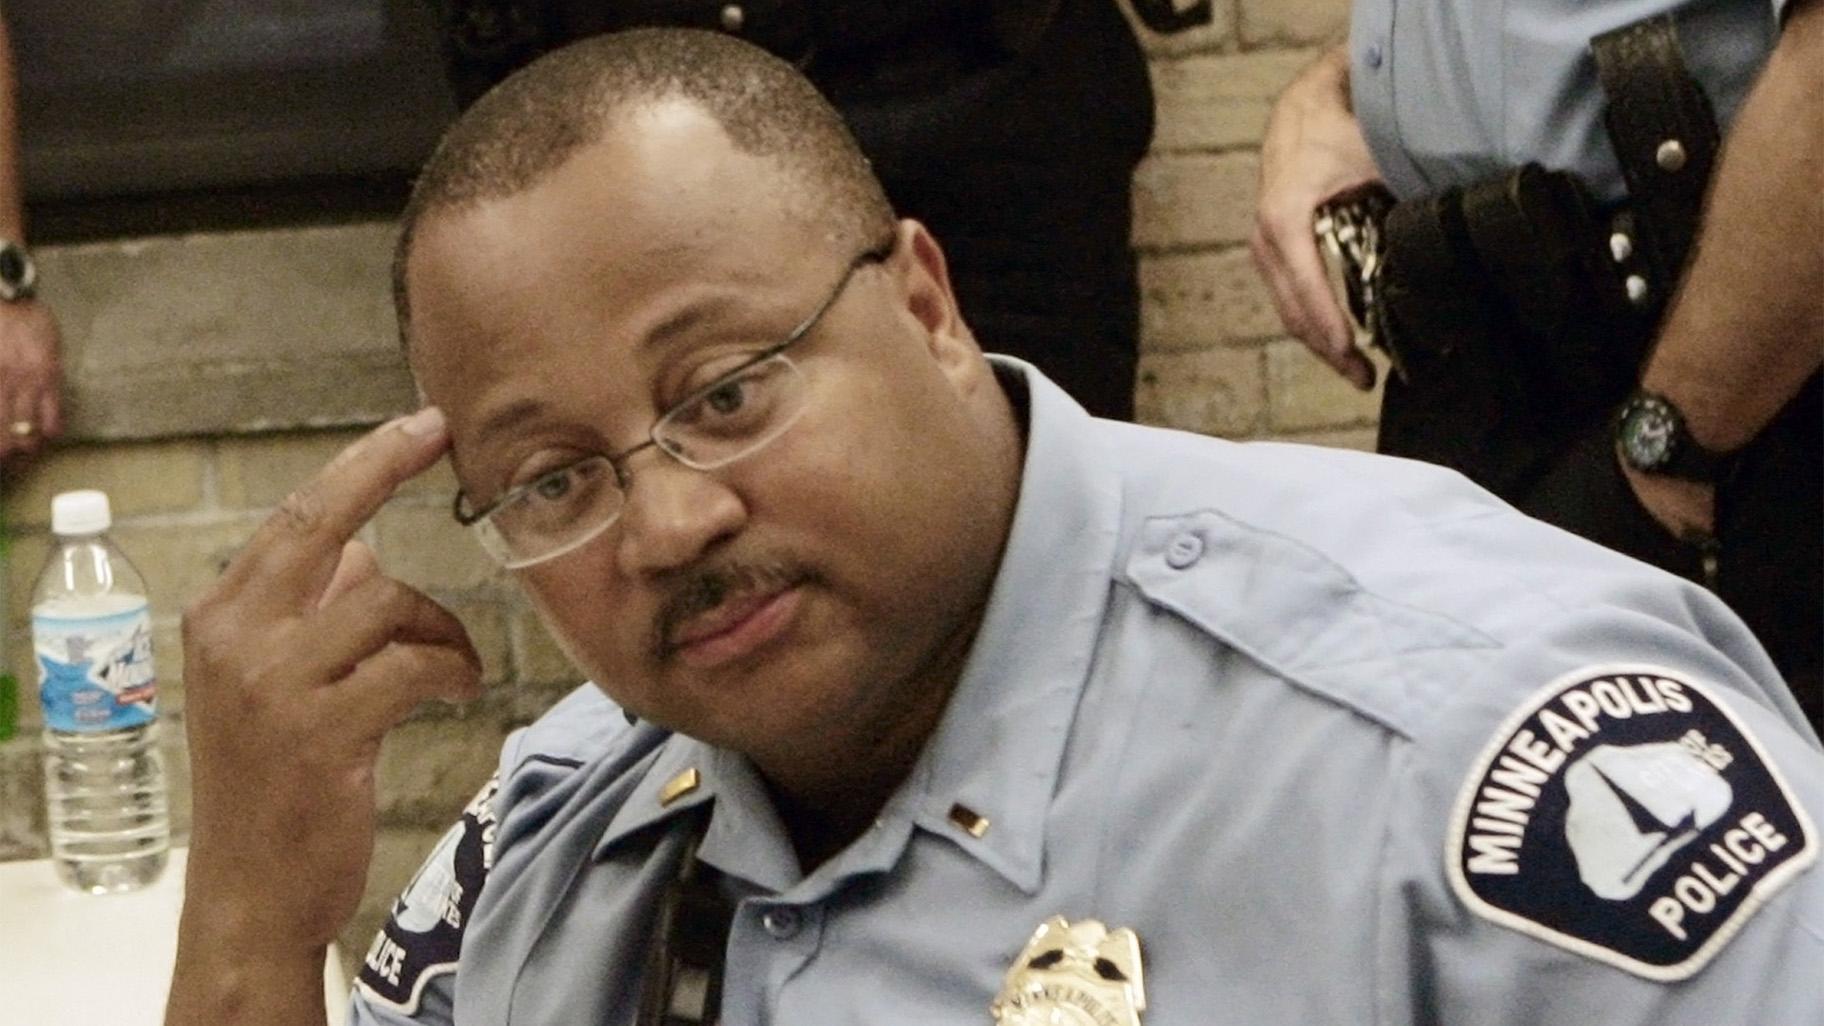 Minneapolis police Lt. Eddie Frizell talks Aug. 3, 2007 about his experiences as a first responder at the Interstate 35W bridge collapse into the Mississippi River in Minneapolis. (AP Photo / Jim Mone, File)